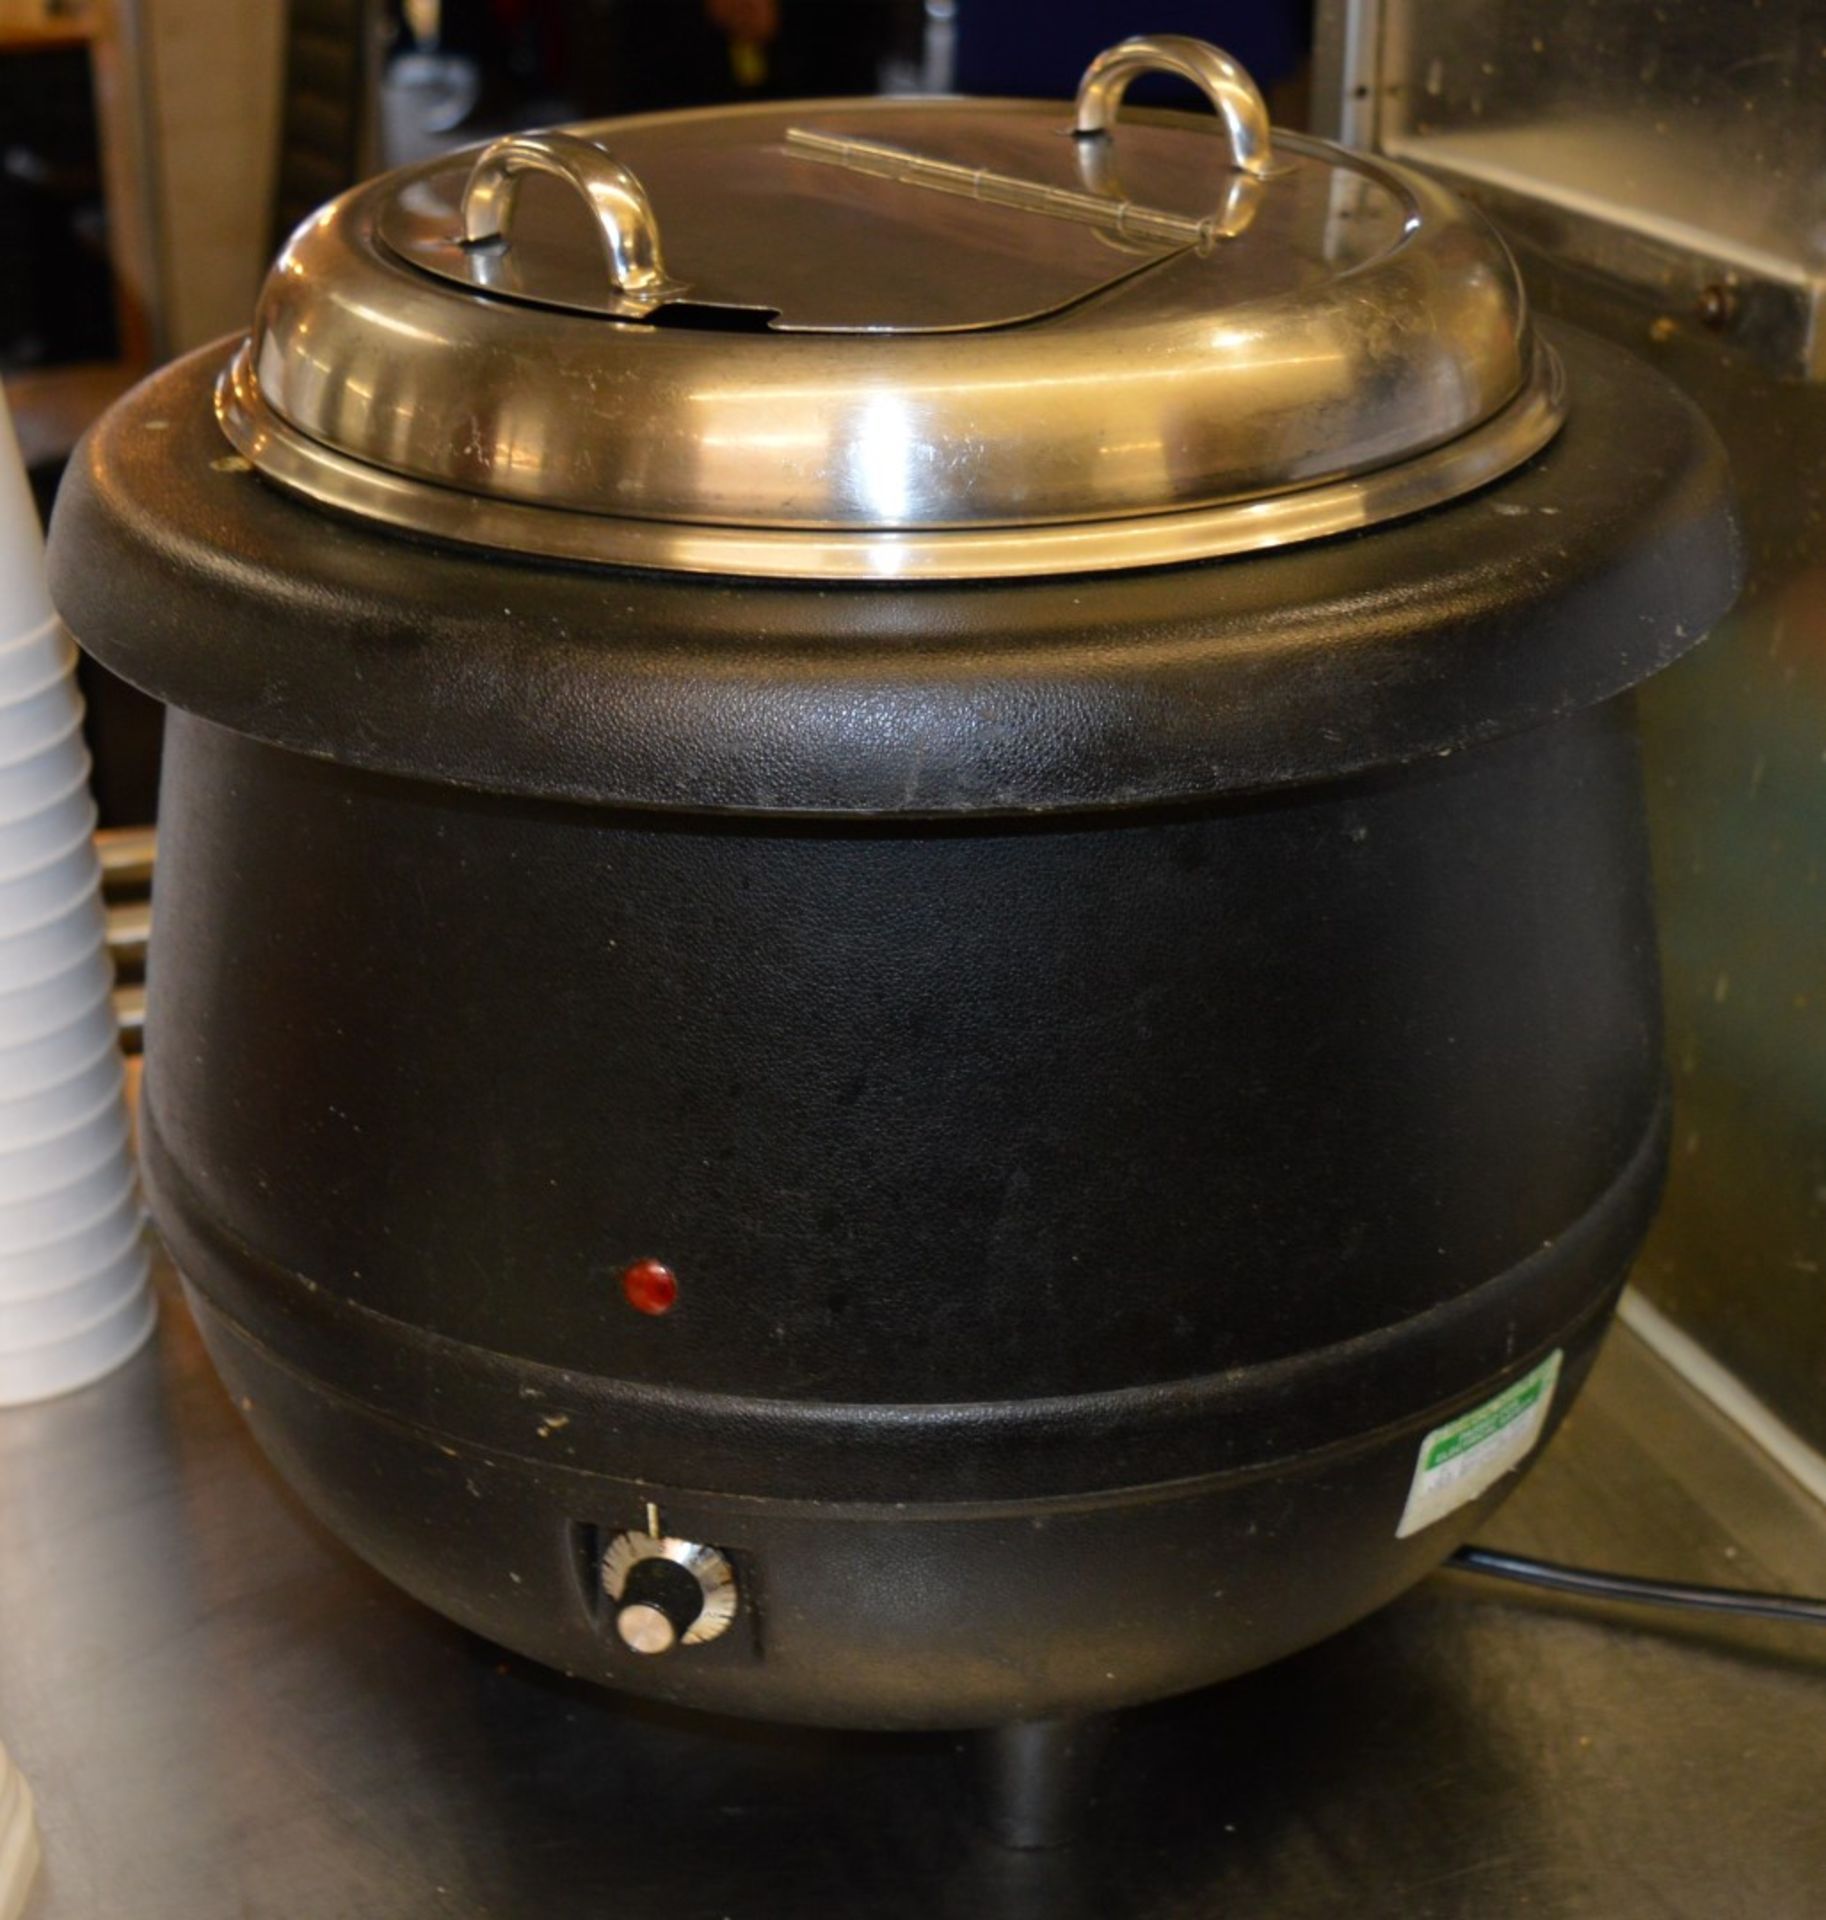 1 x Soup Kettle With Lid and Variable Heat Dial - 240v Plug - CL078 - Location: Poulton Le Fylde,